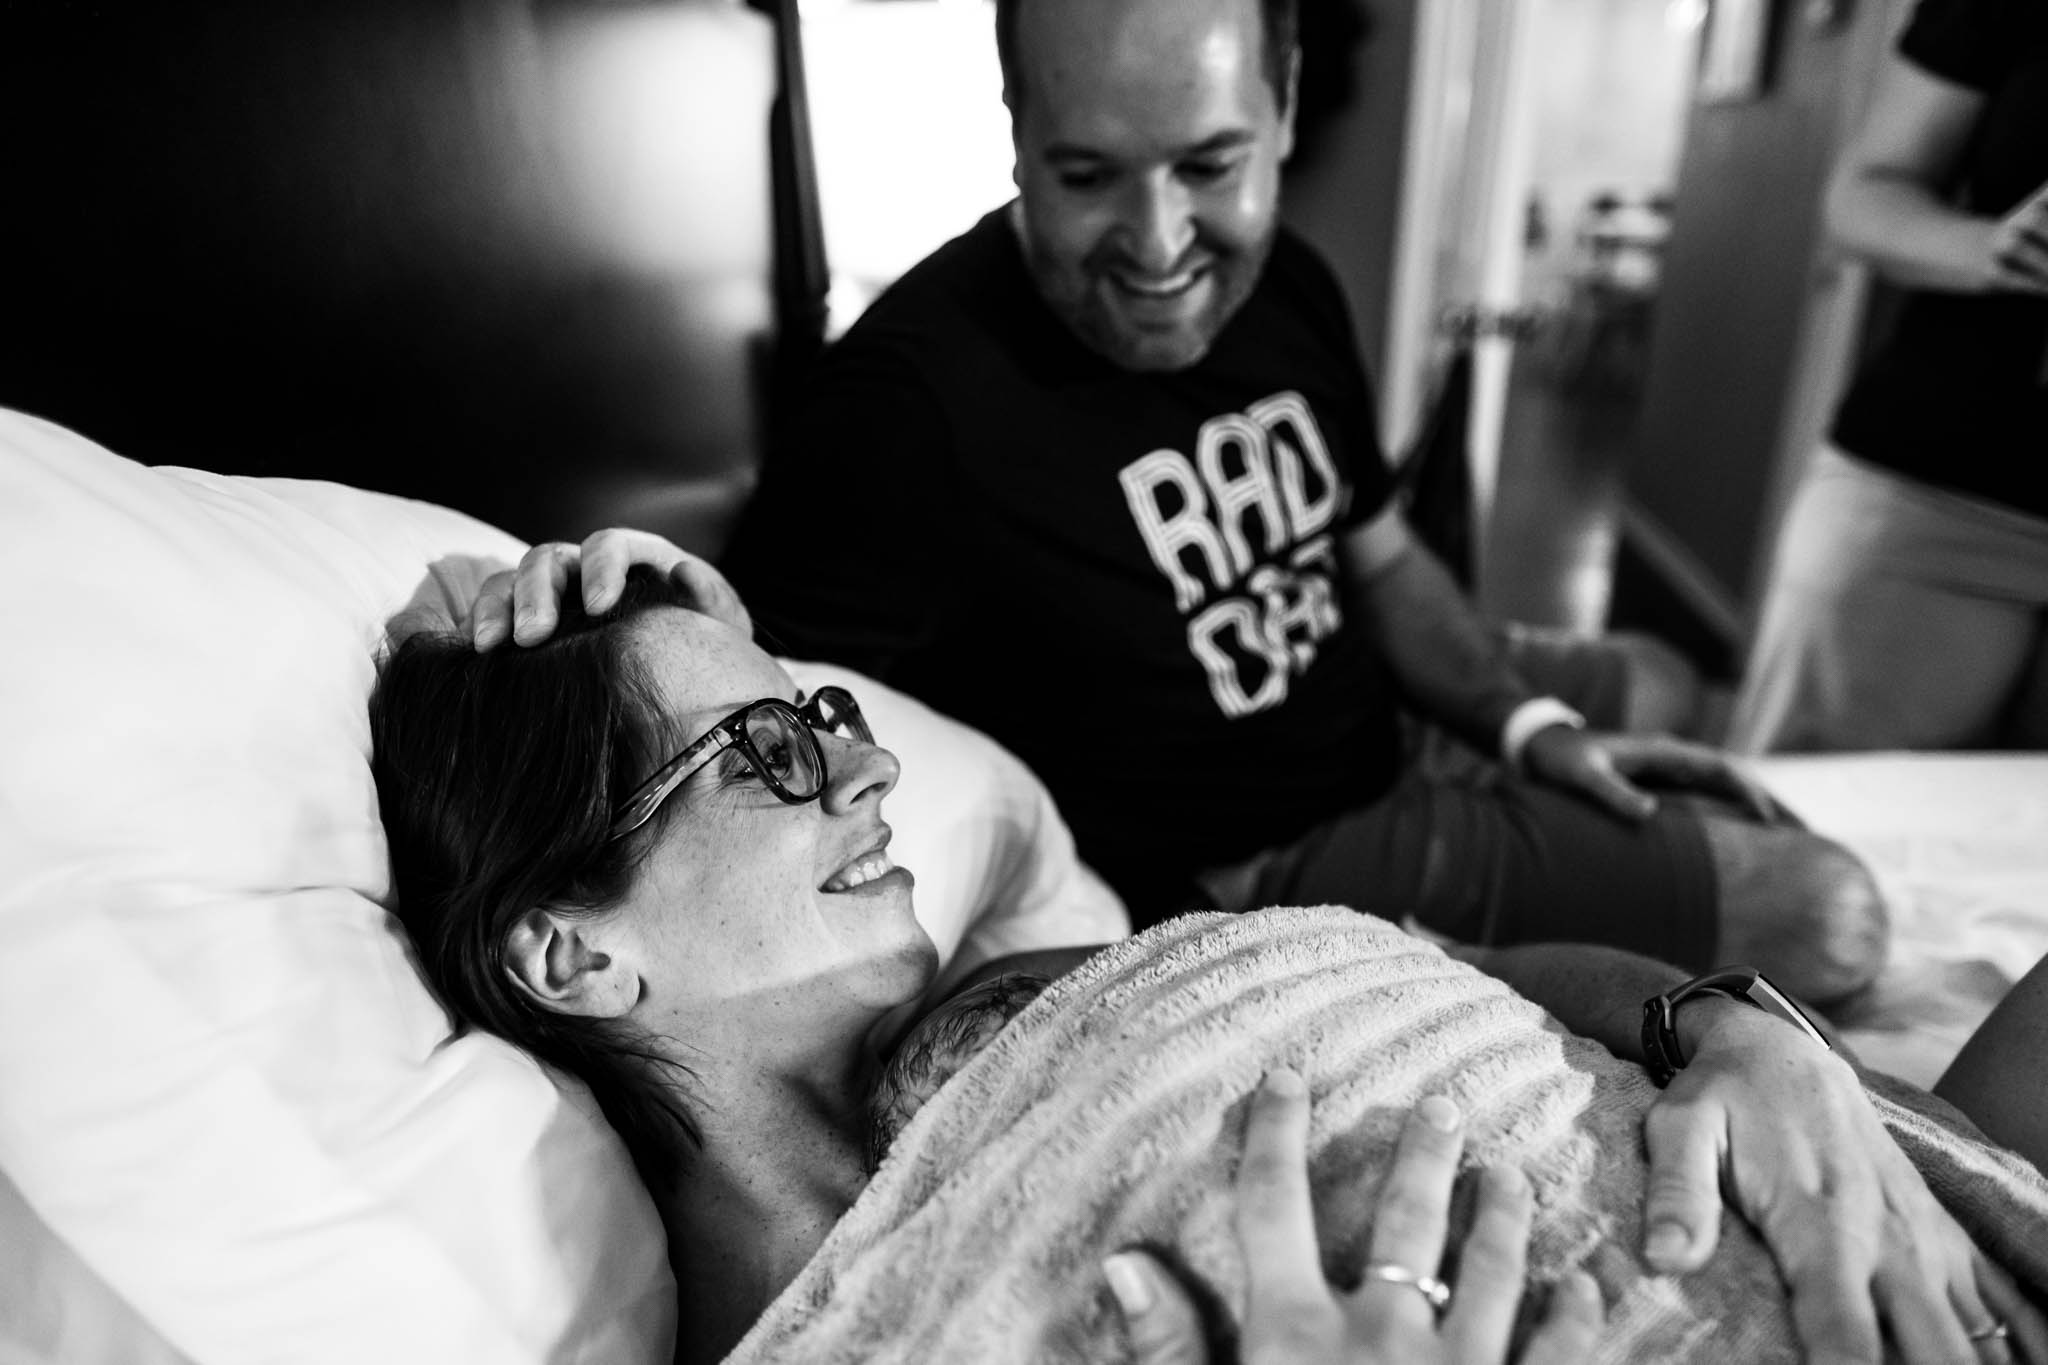 Denton Birth Photographer, Lawren Rose Photography, captures a moment between a husband and wife as he adores her for having a successful home birth